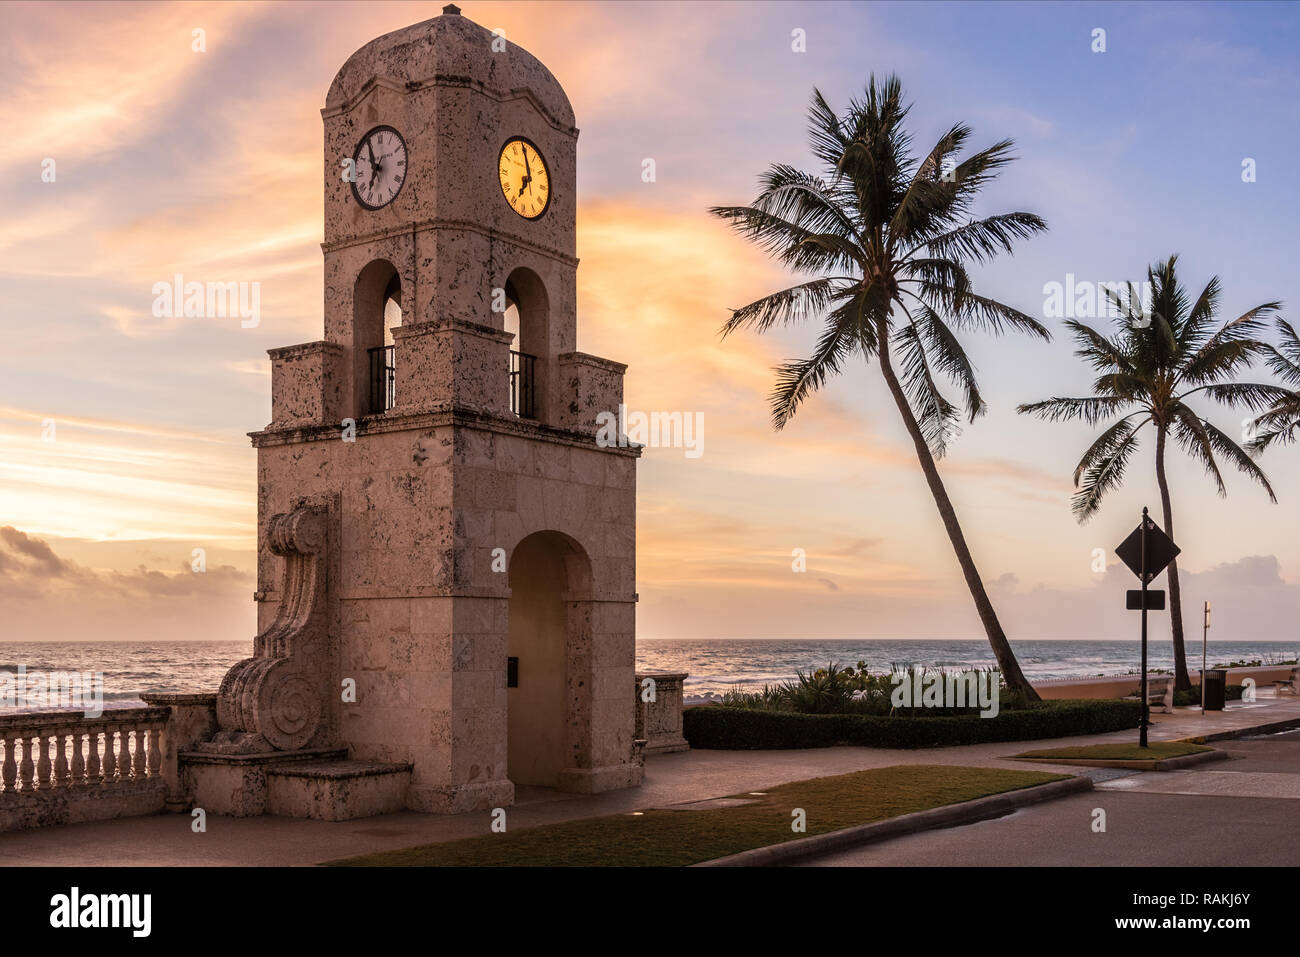 Iconic Clock Tower at the entrance to Worth Avenue on the seaside promenade along South Ocean Boulevard in Palm Beach, Florida. (USA) Stock Photo